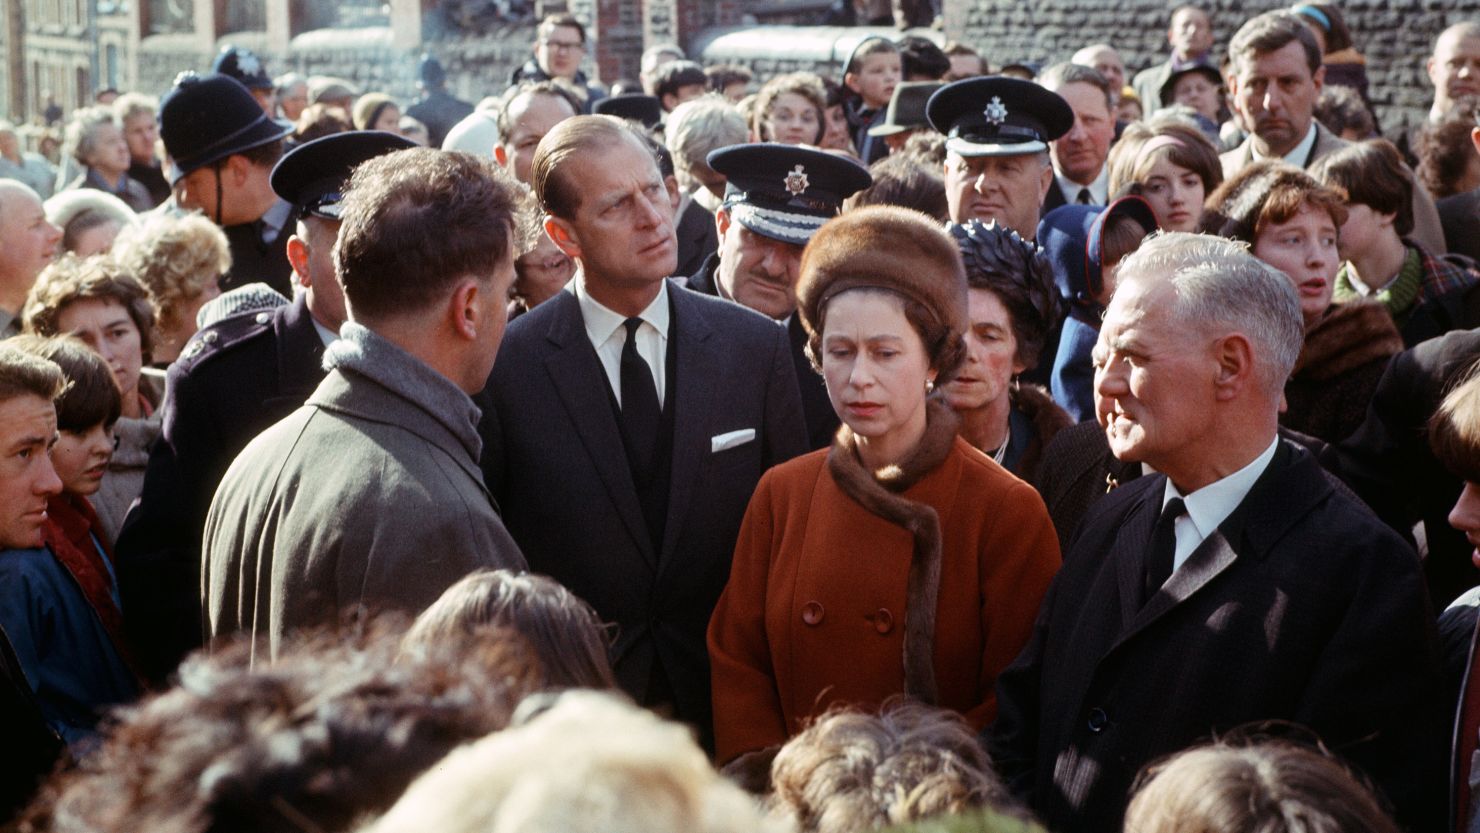 The Queen and Prince Philip visit Aberfan in 1966 in the aftermath of the disaster. 